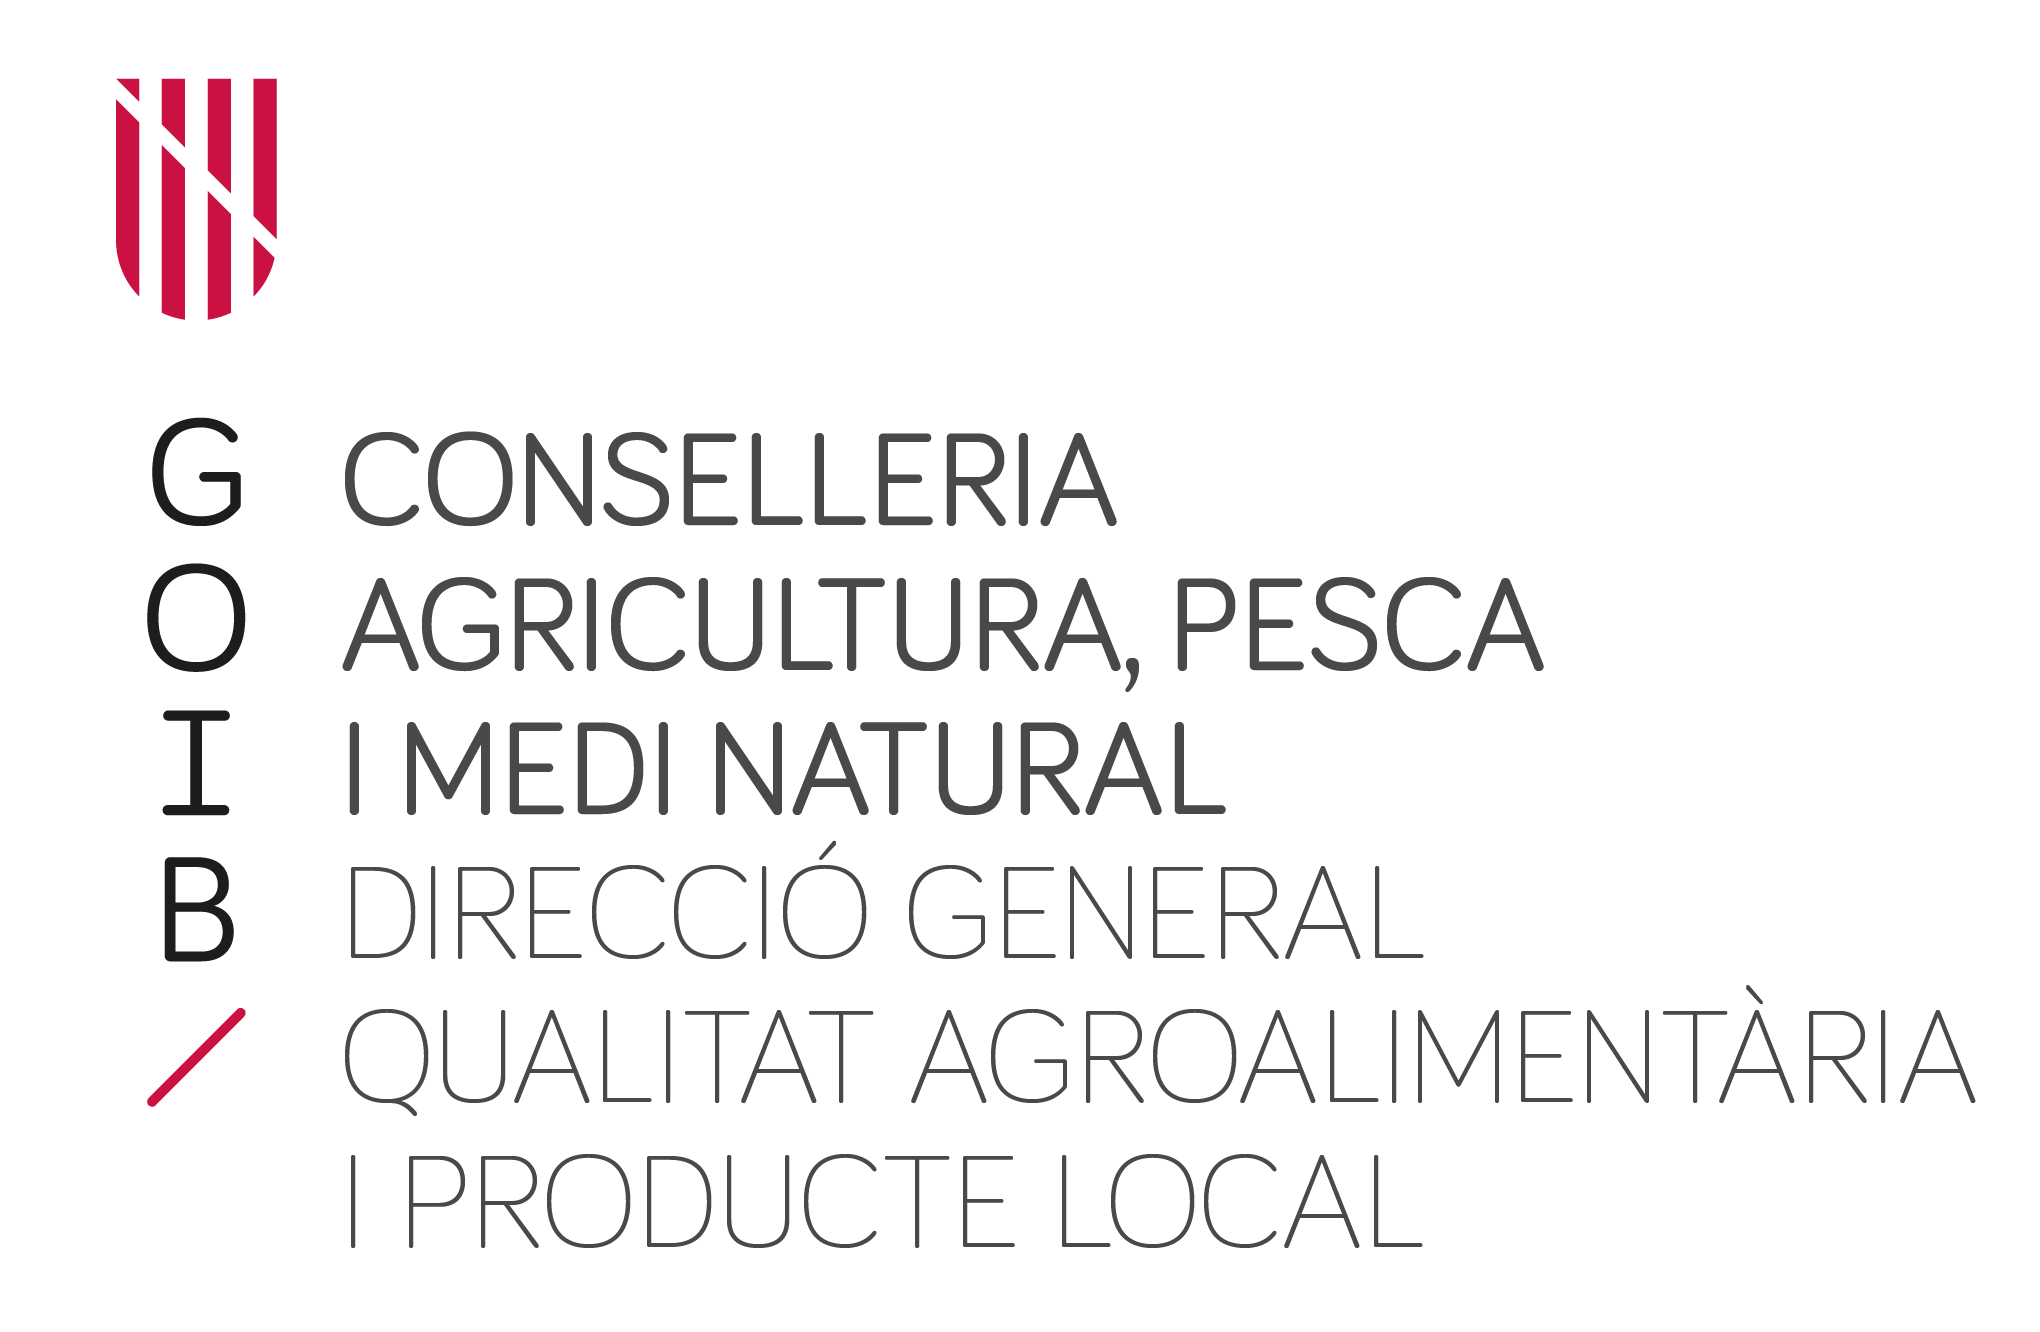  - Photo gallery - Balearic Islands - Agrifoodstuffs, designations of origin and Balearic gastronomy